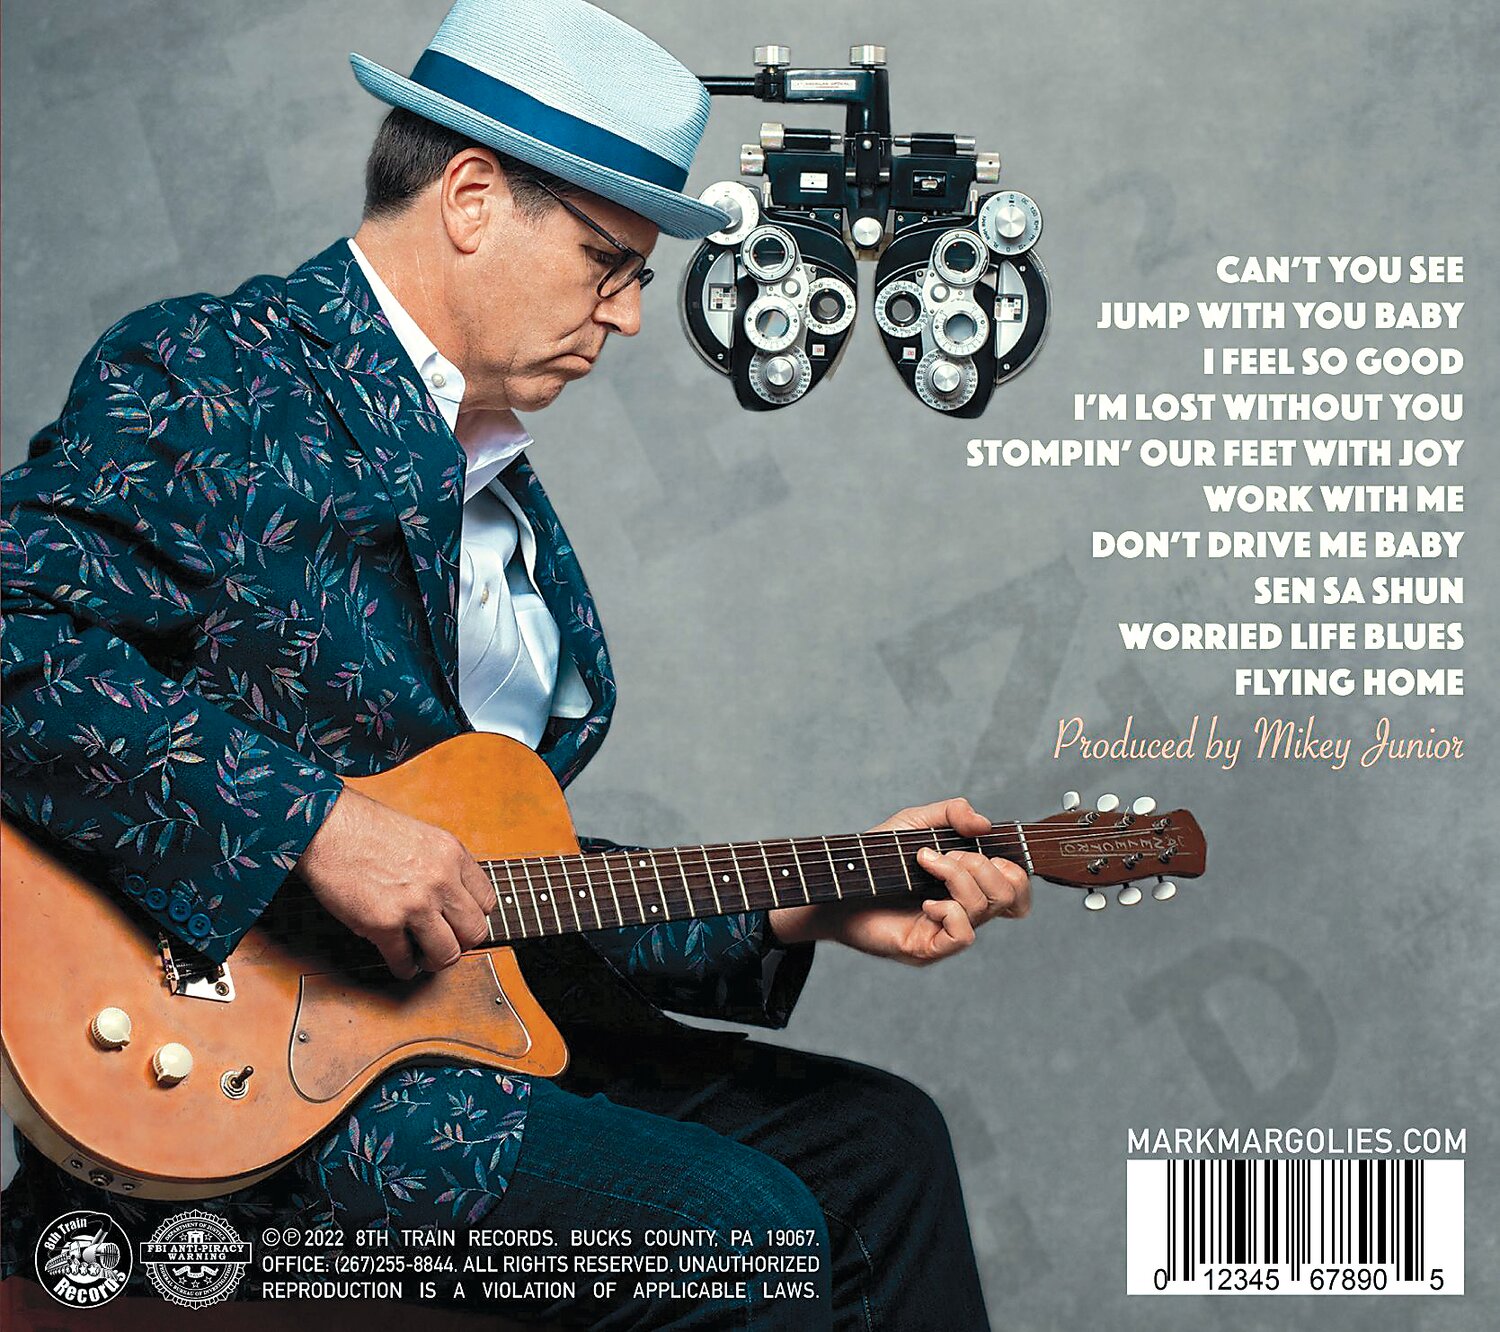 The back cover of Levittown optometrist-blues guitarist Mark Margolies’ debut album, “Can’t You See.”